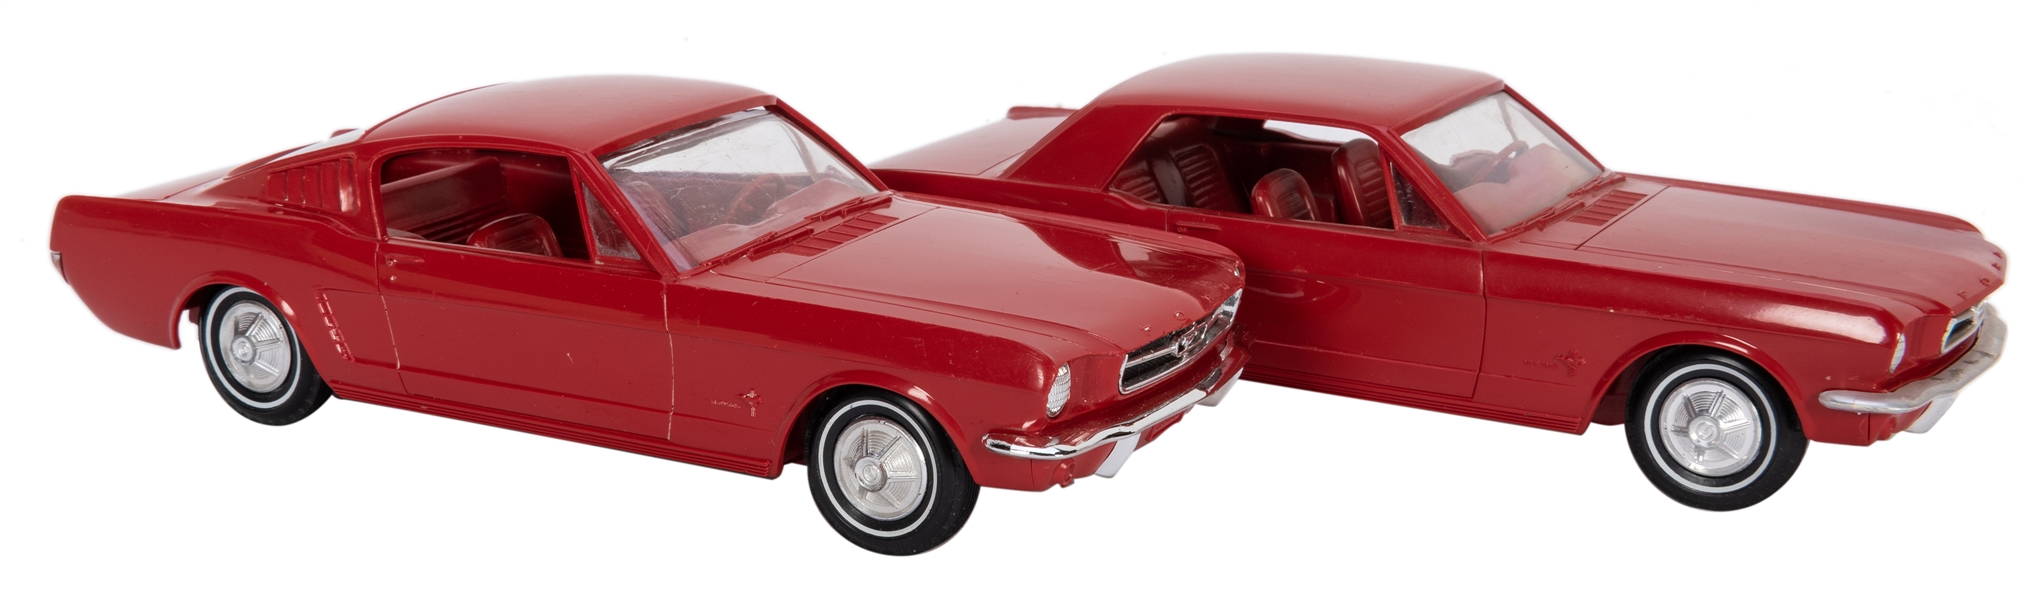  Lot of 2 1965 Ford Mustang Promo Cars.